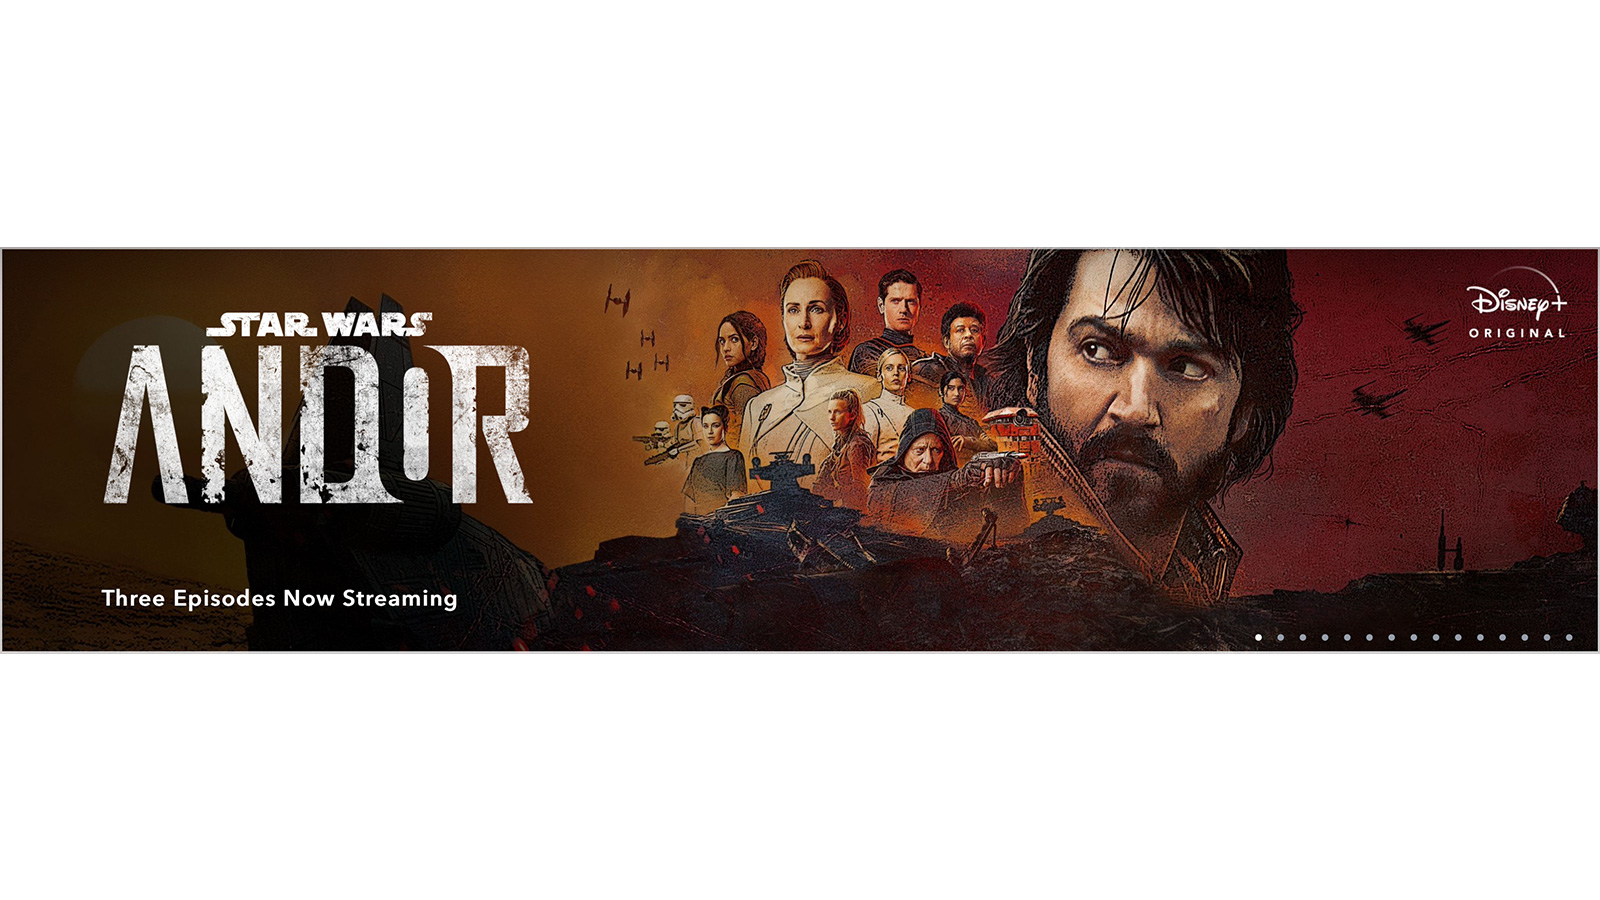 Now Streaming On Disney+ - First 3 Episodes Of Star Wars: Andor